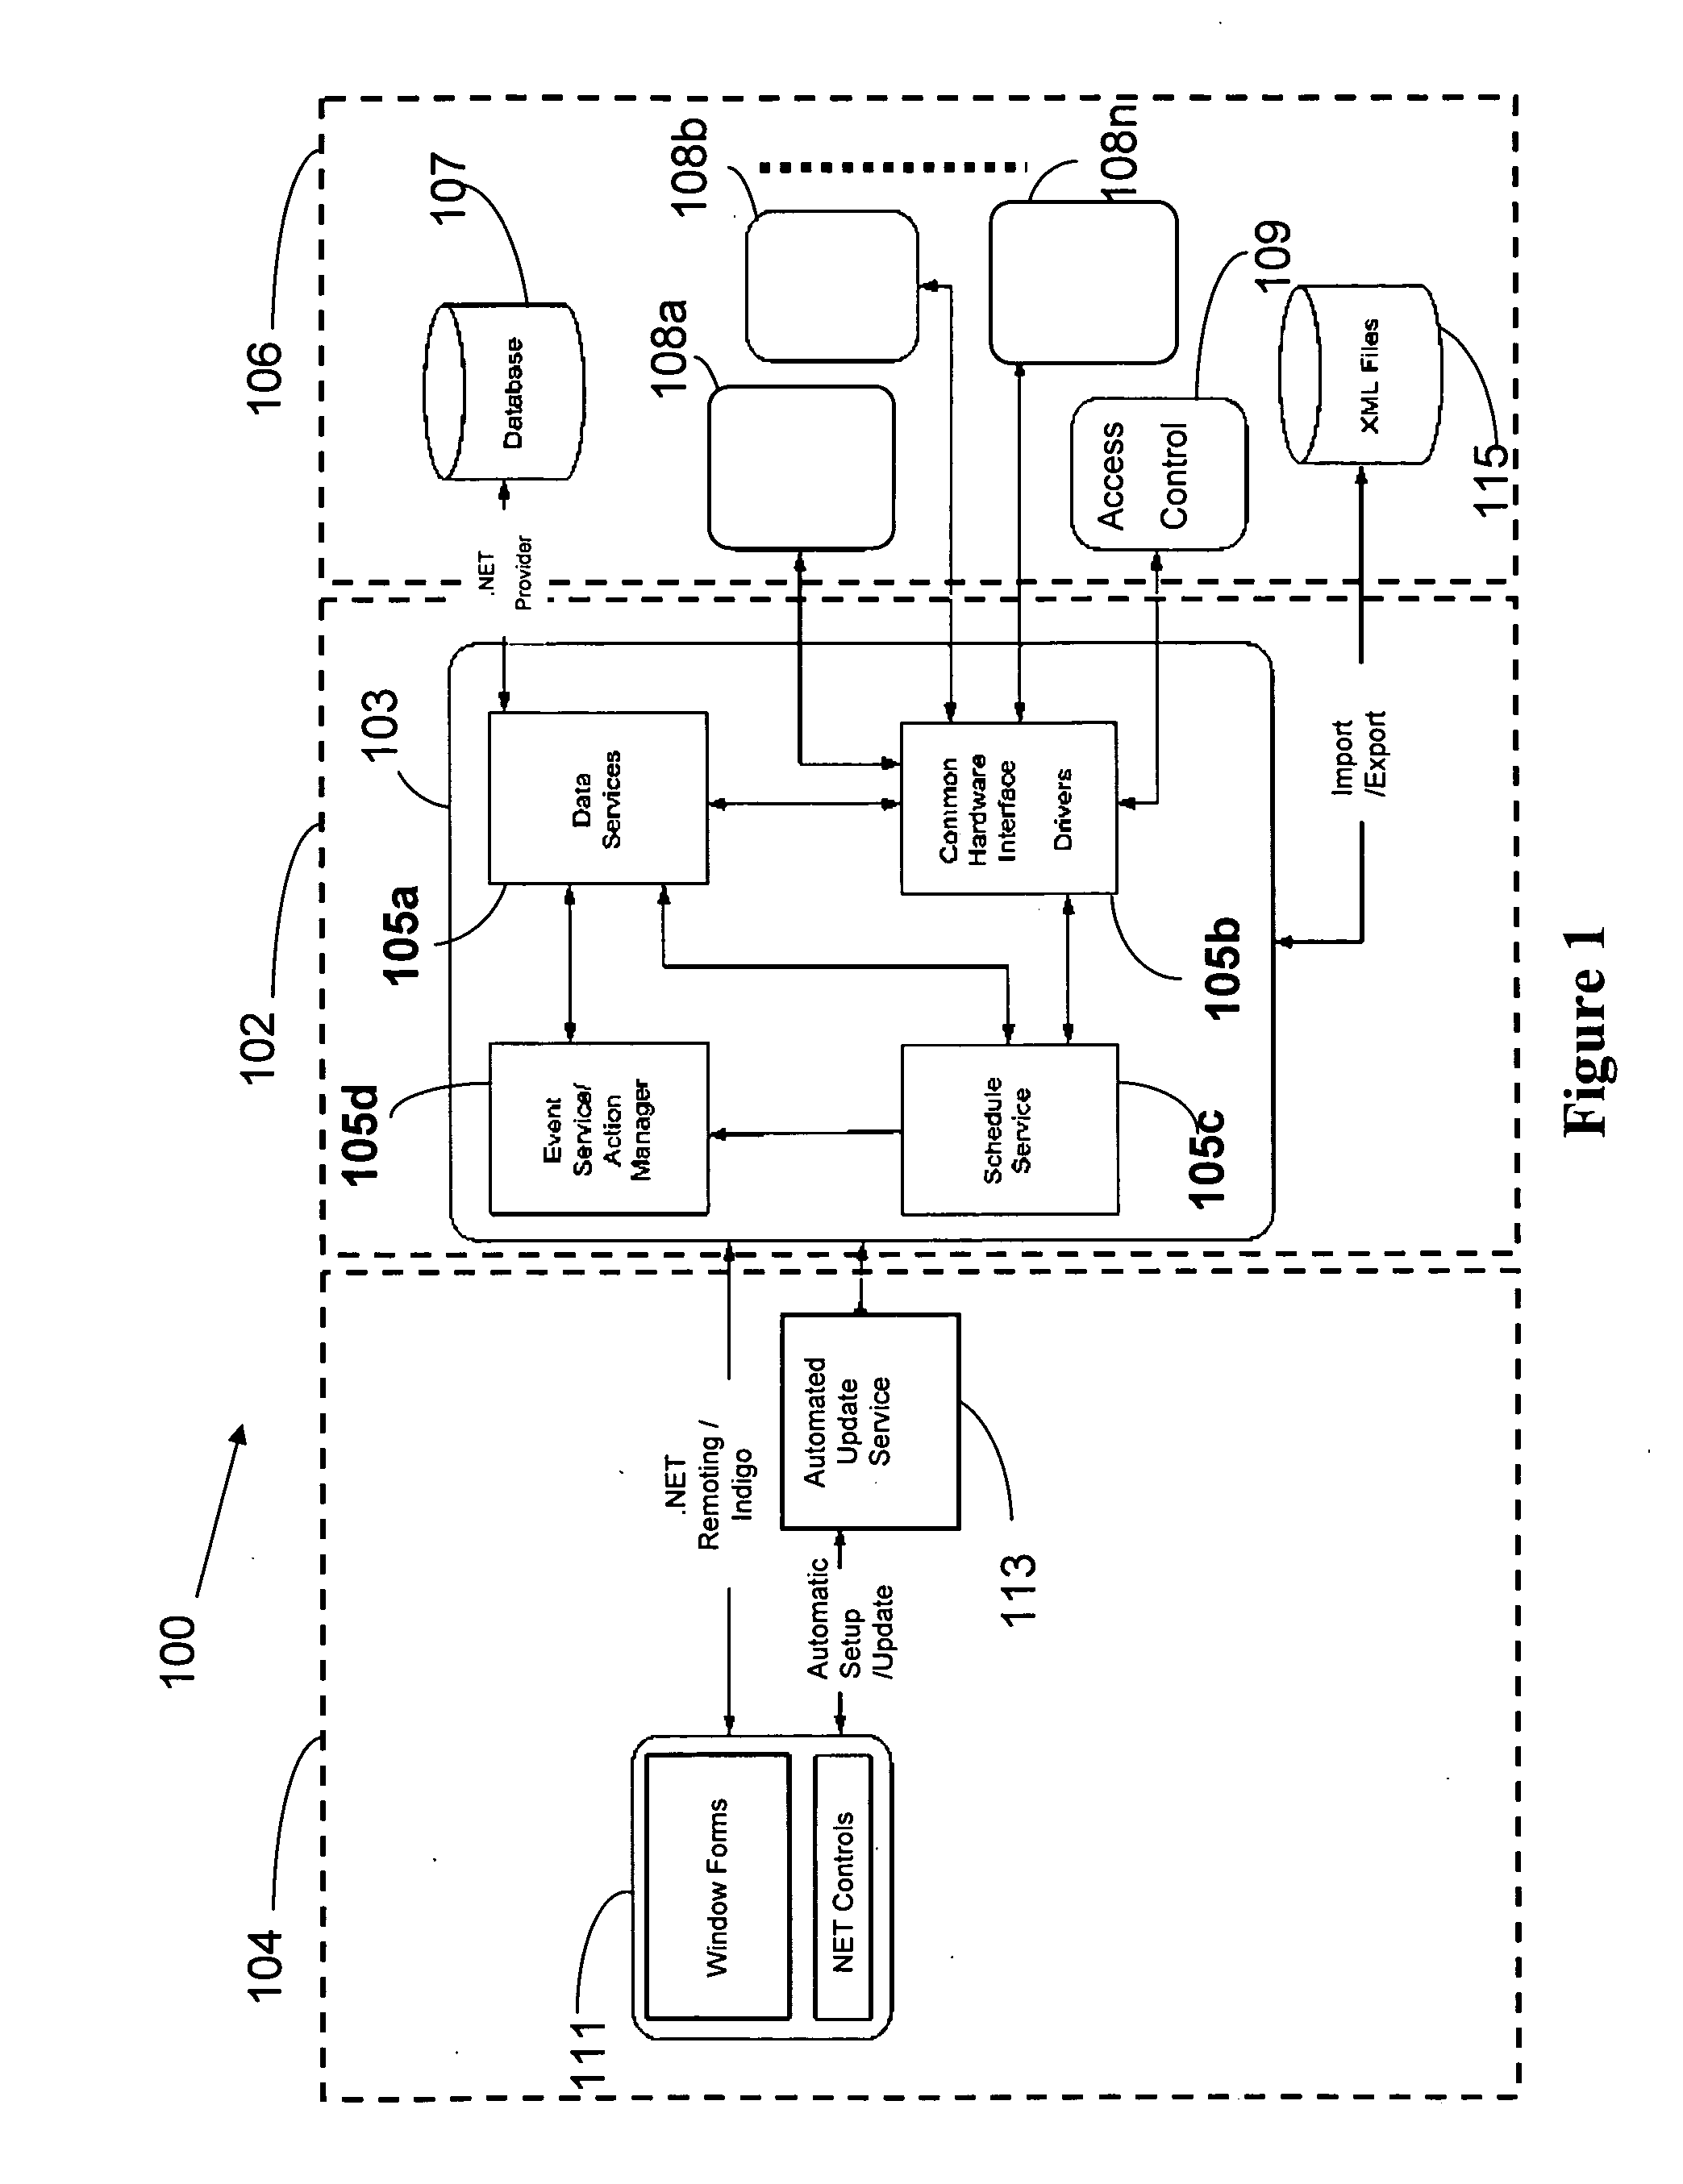 System and method for event management